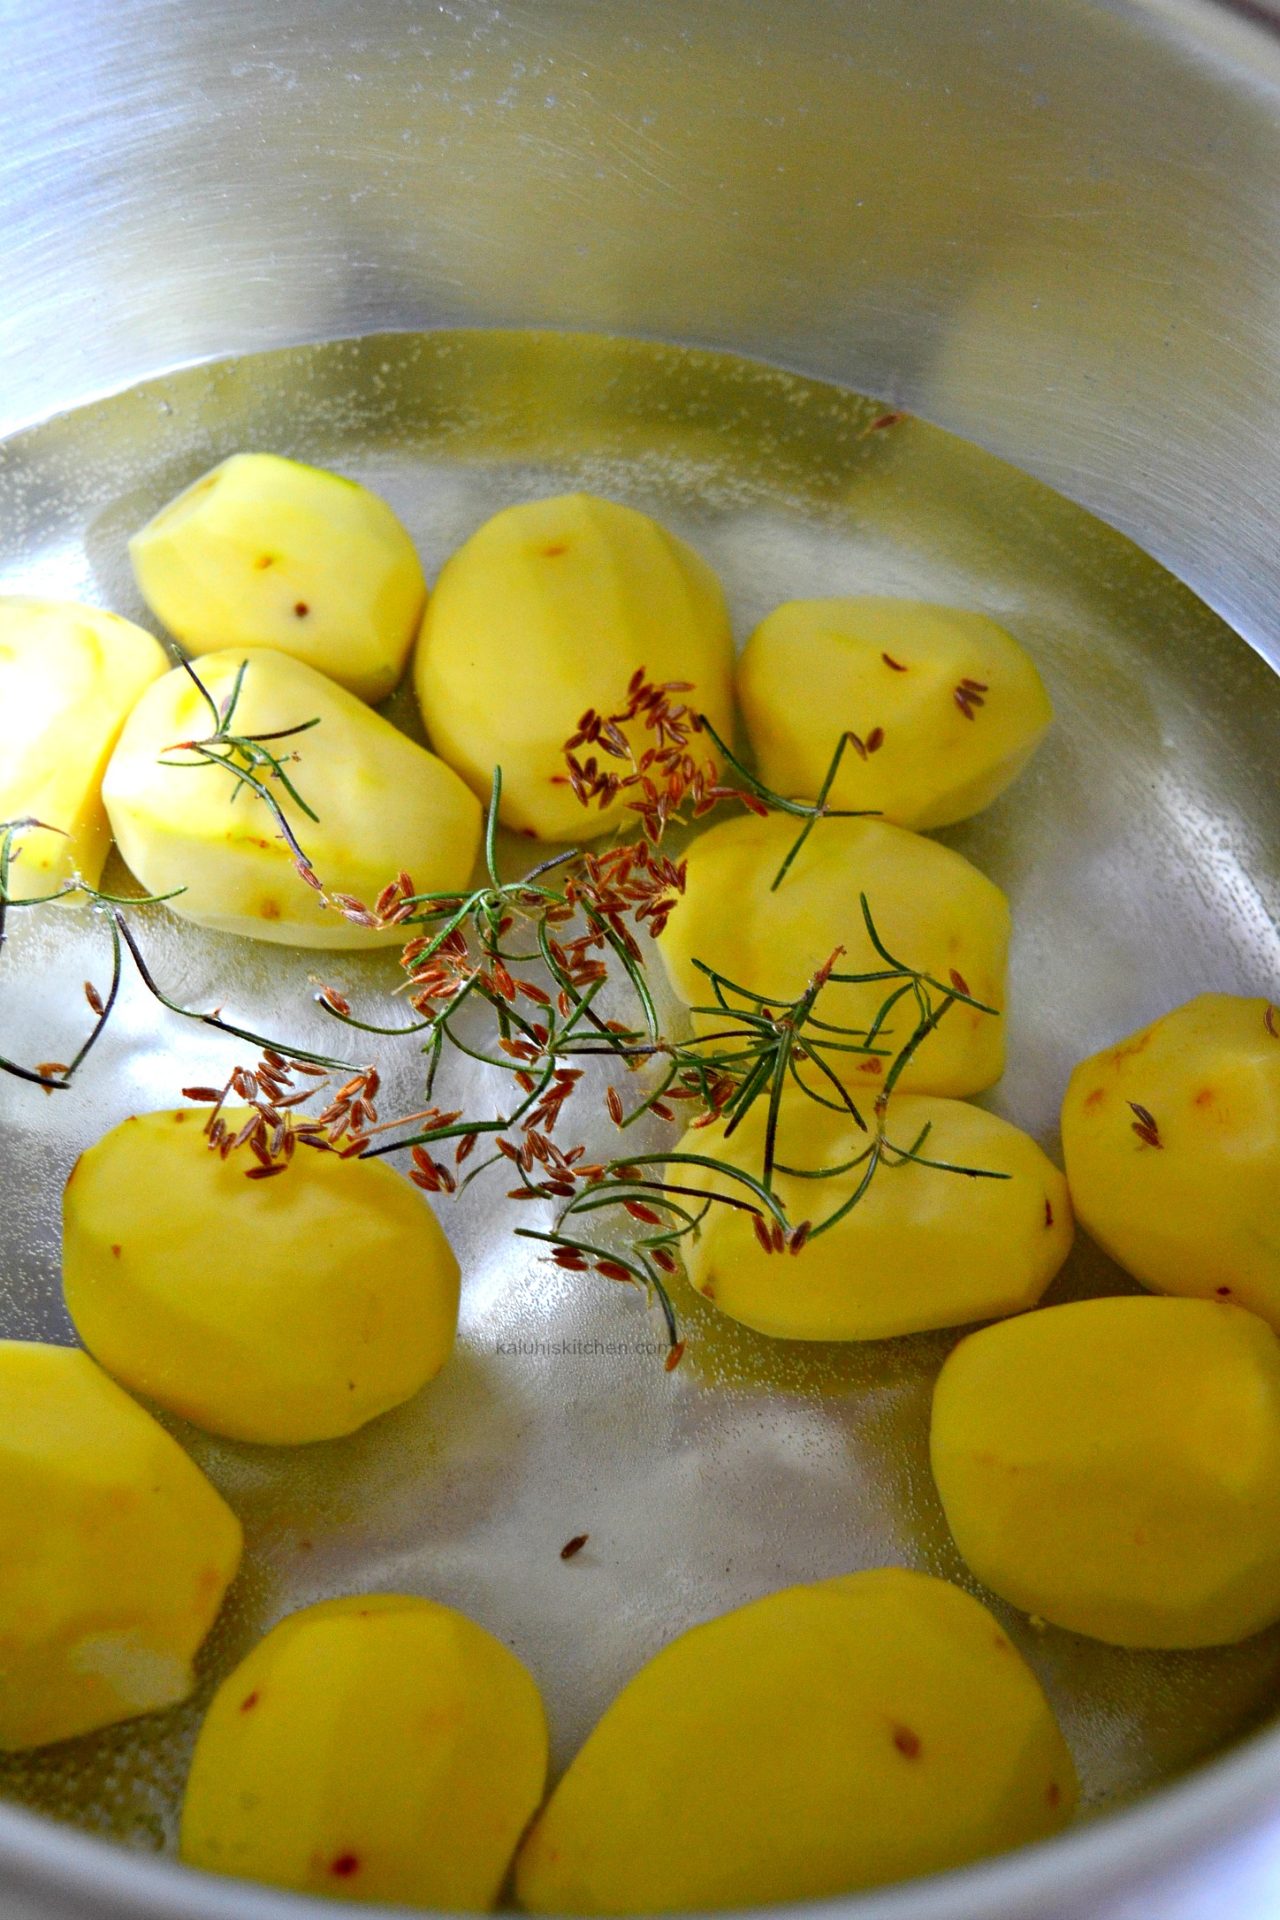 boil your potatoes with some cumin seeds and rosemary for all the flavor to deeply infuse_kaluhiskitchen.com